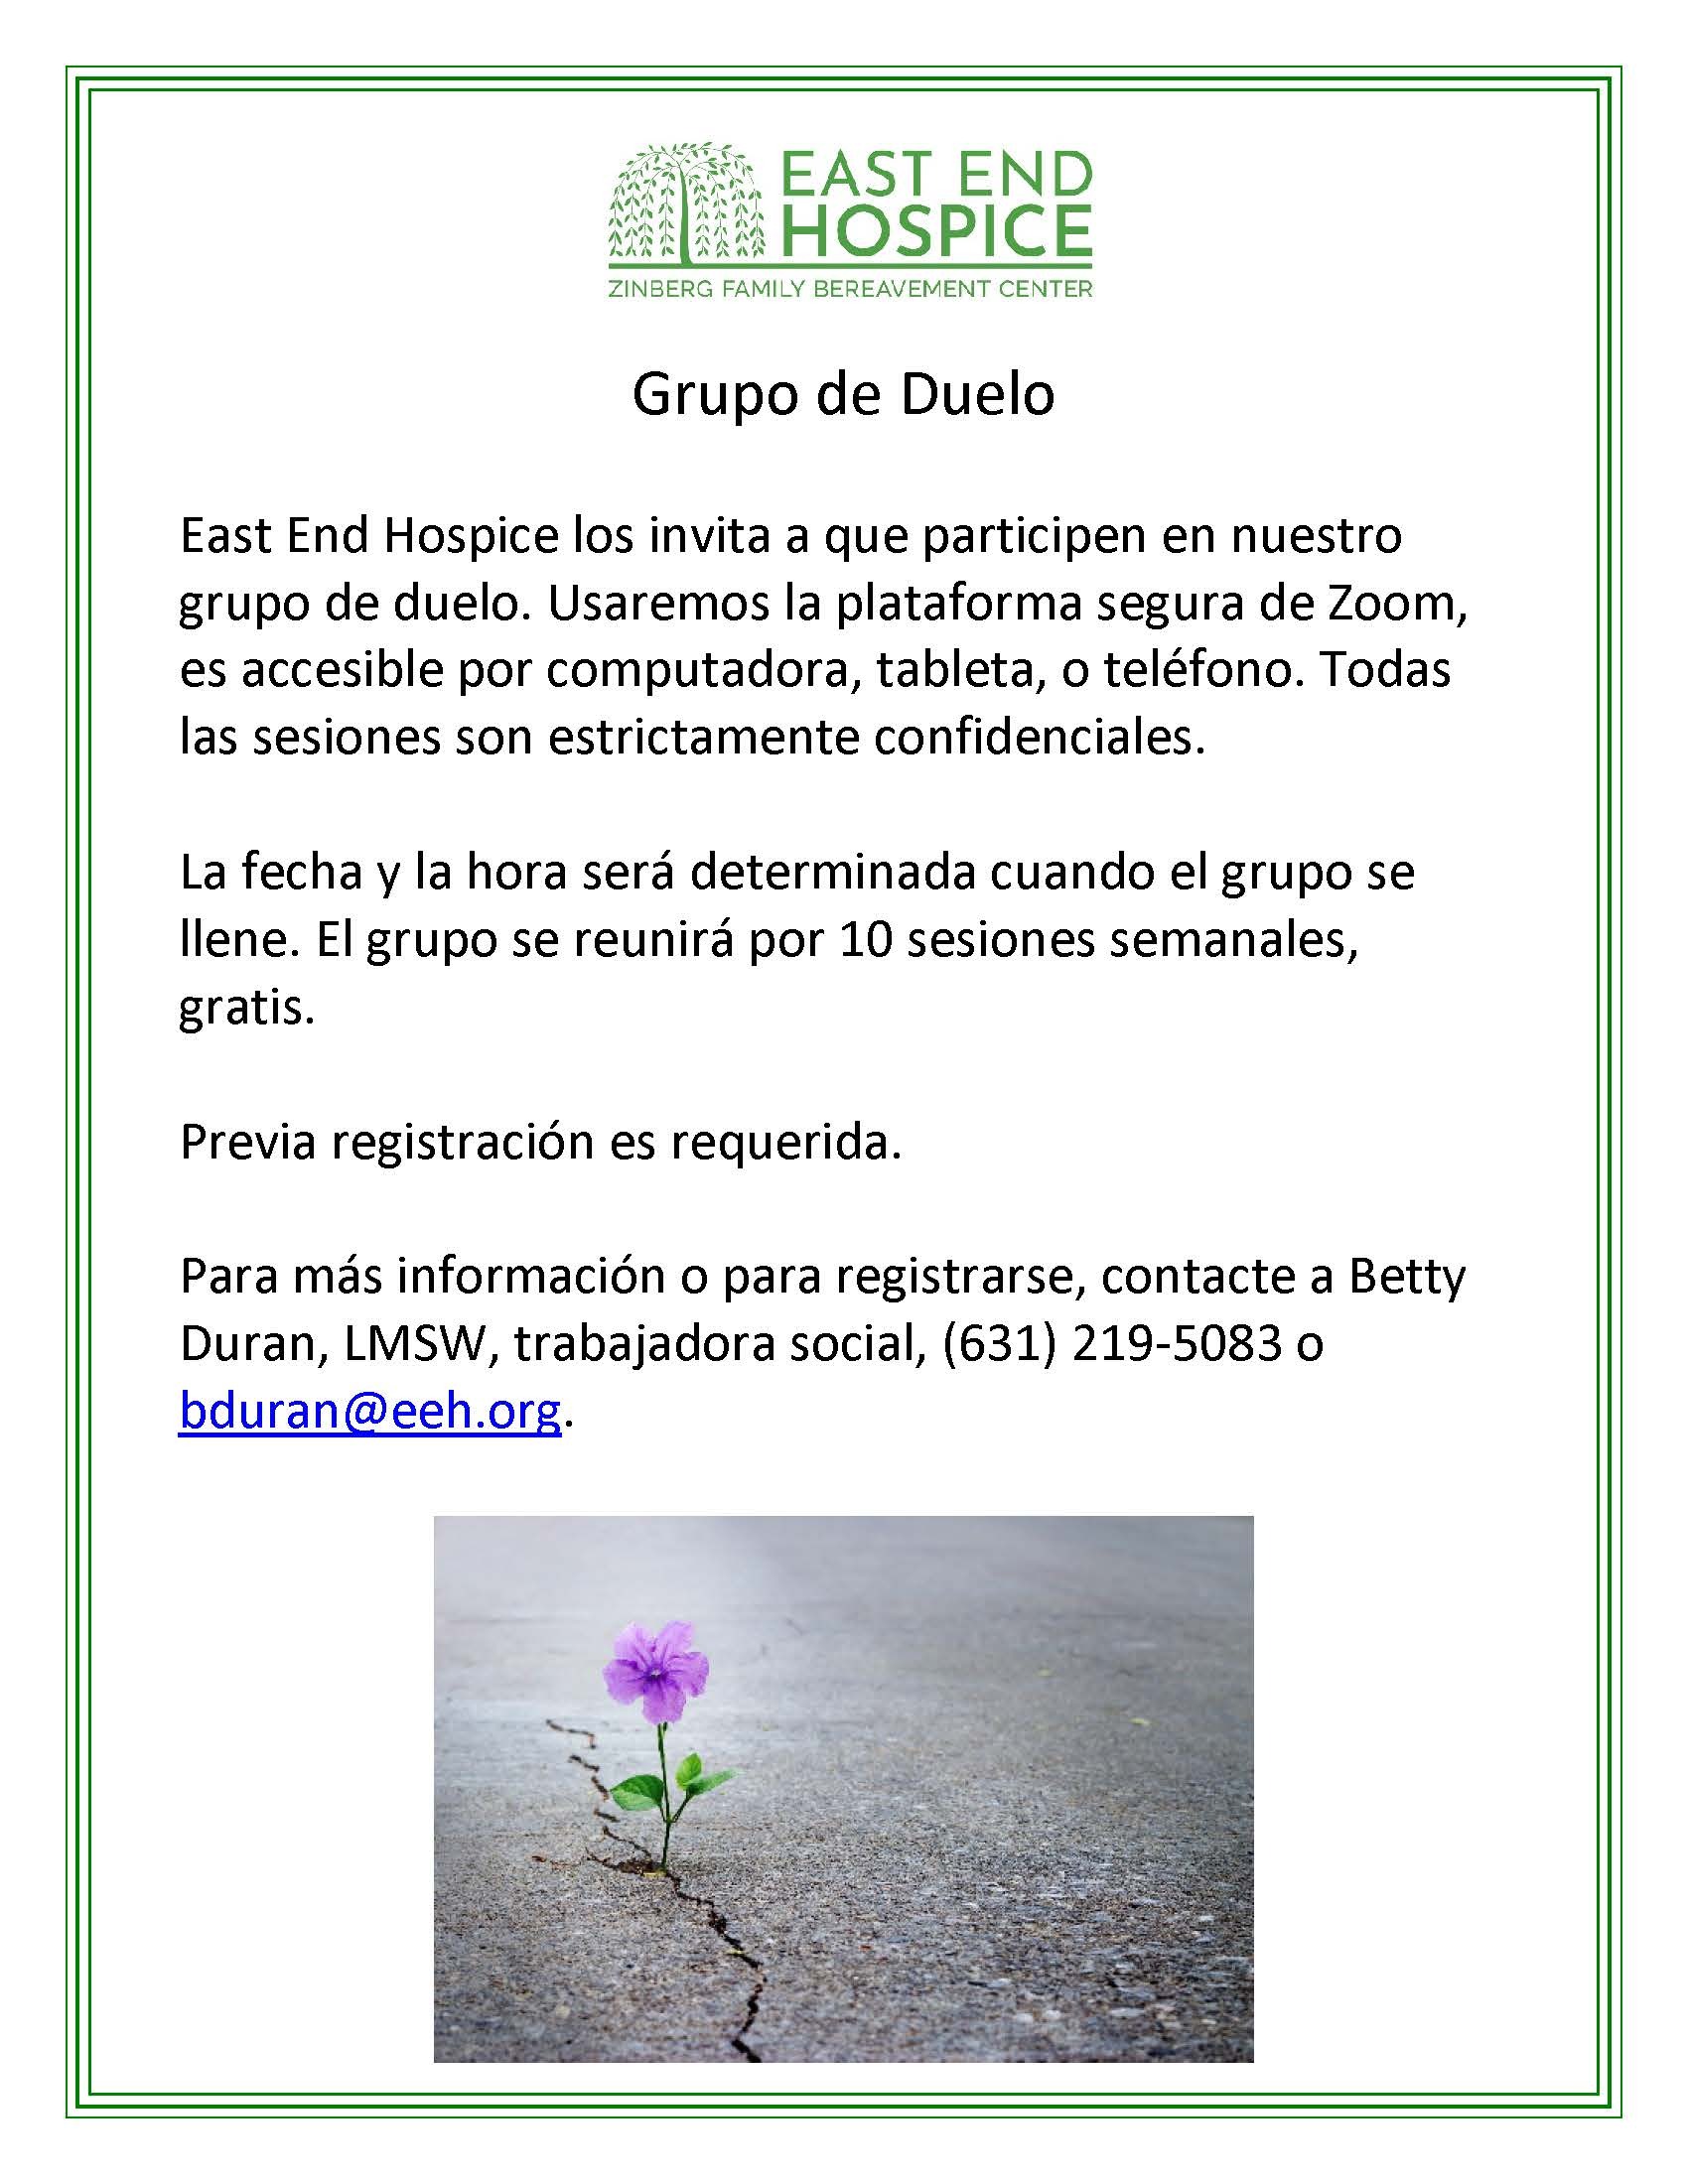 East End Hospice will begin offering group bereavement counseling for Spanish speakers.